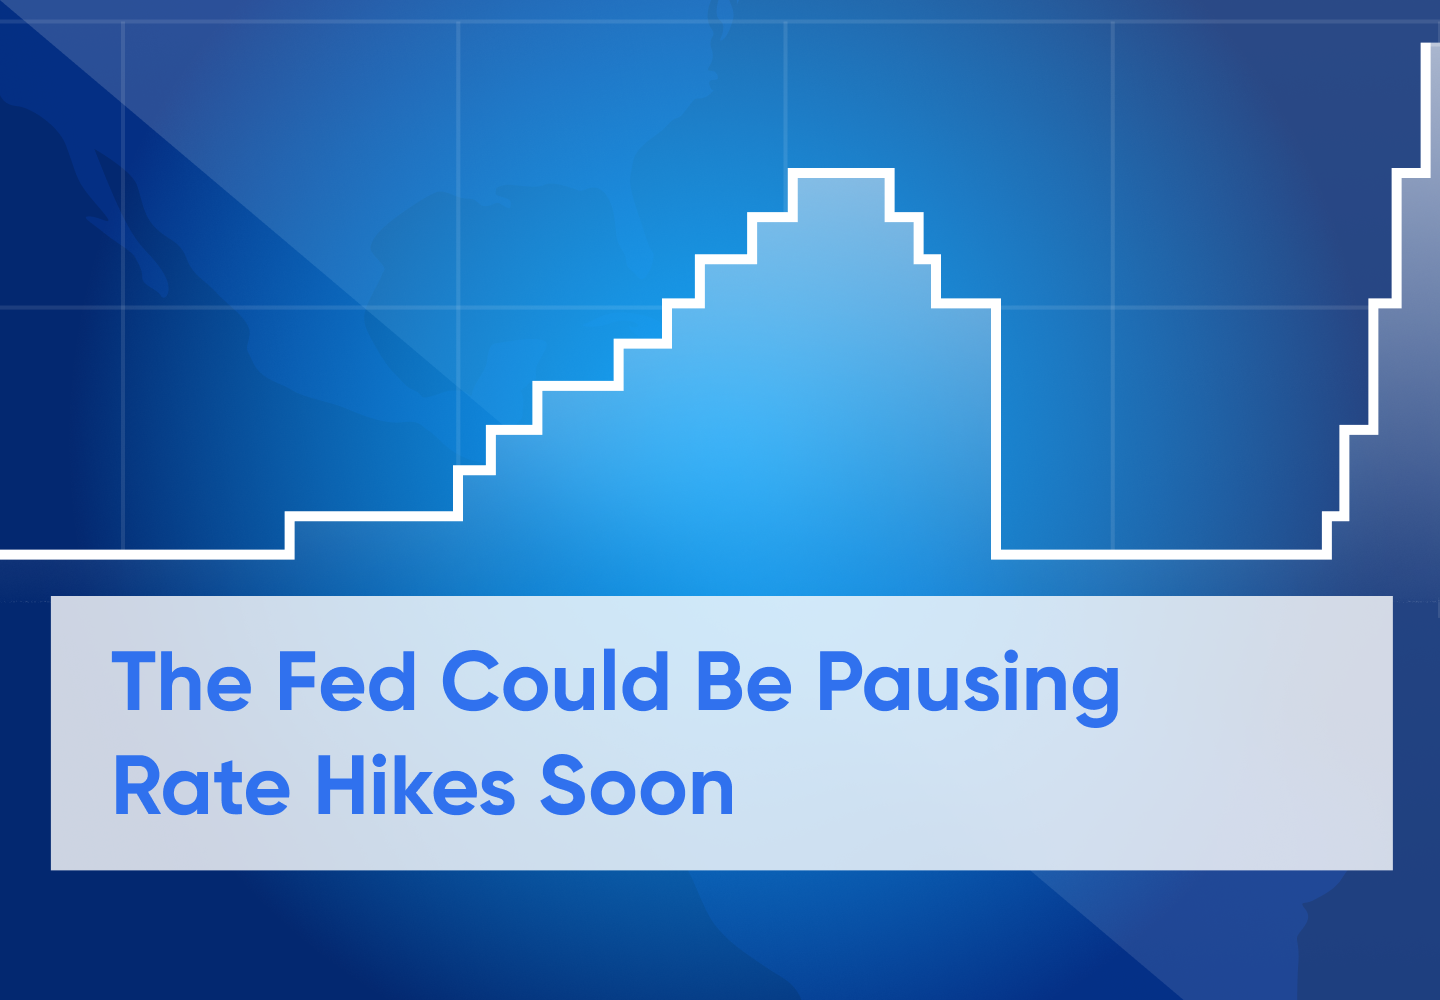 Fed Officials Hint at Slowing Rate Hike Path